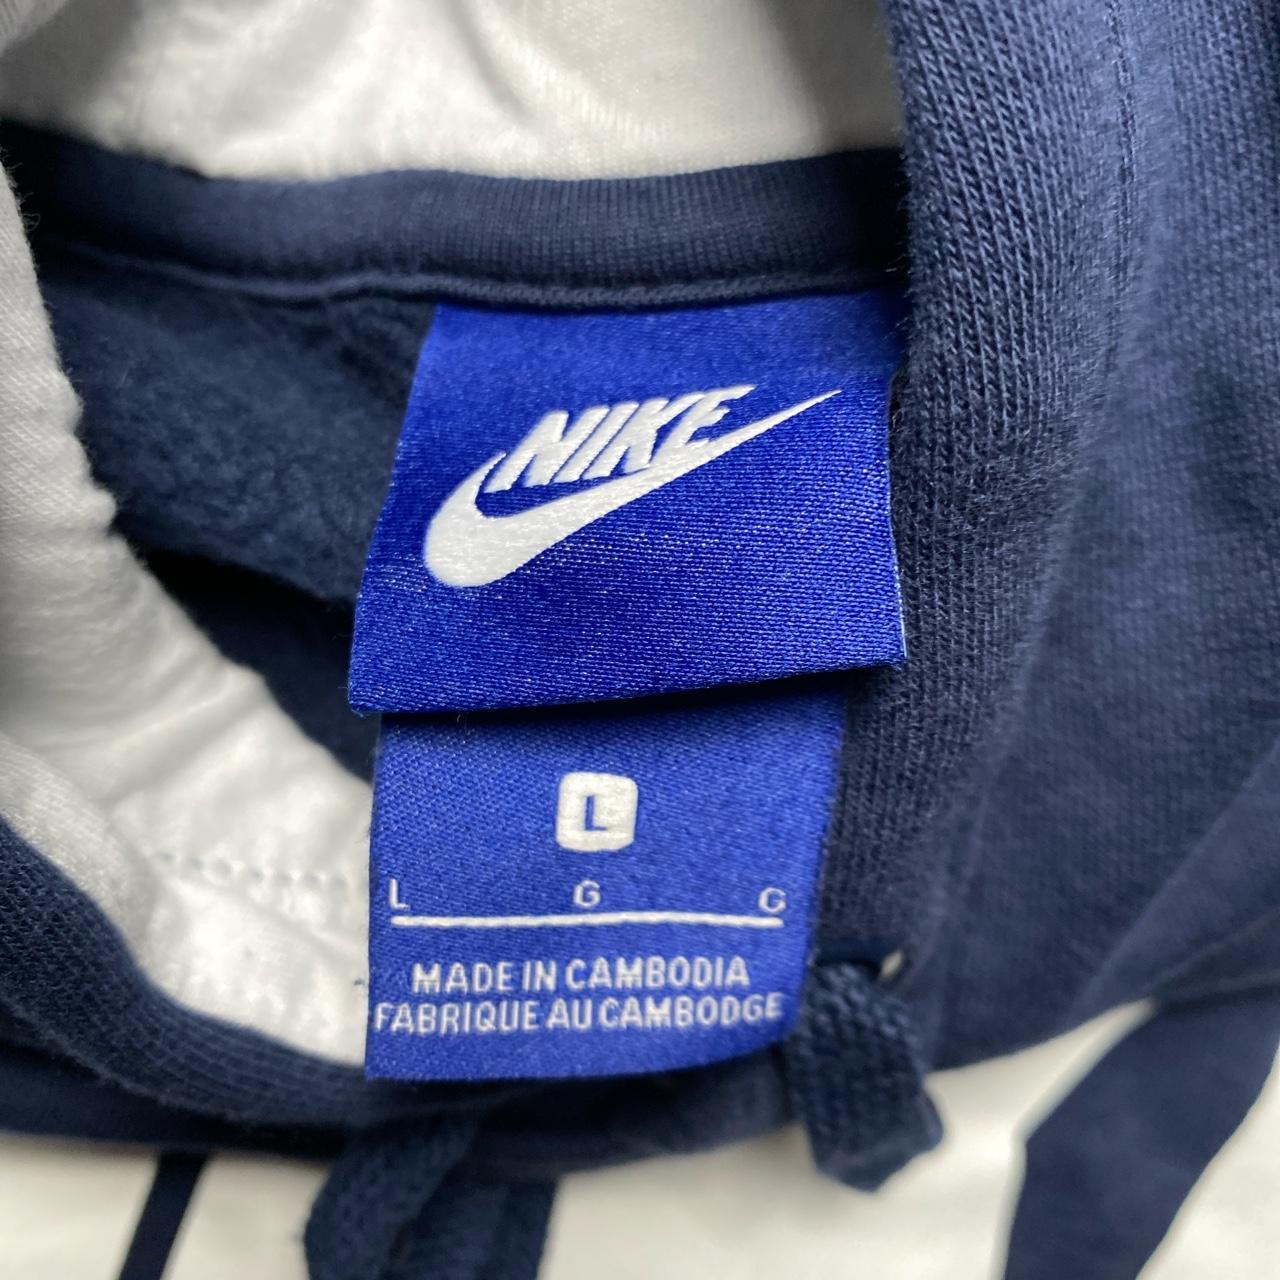 Nike Club Big Spellout Navy and White Hoodie